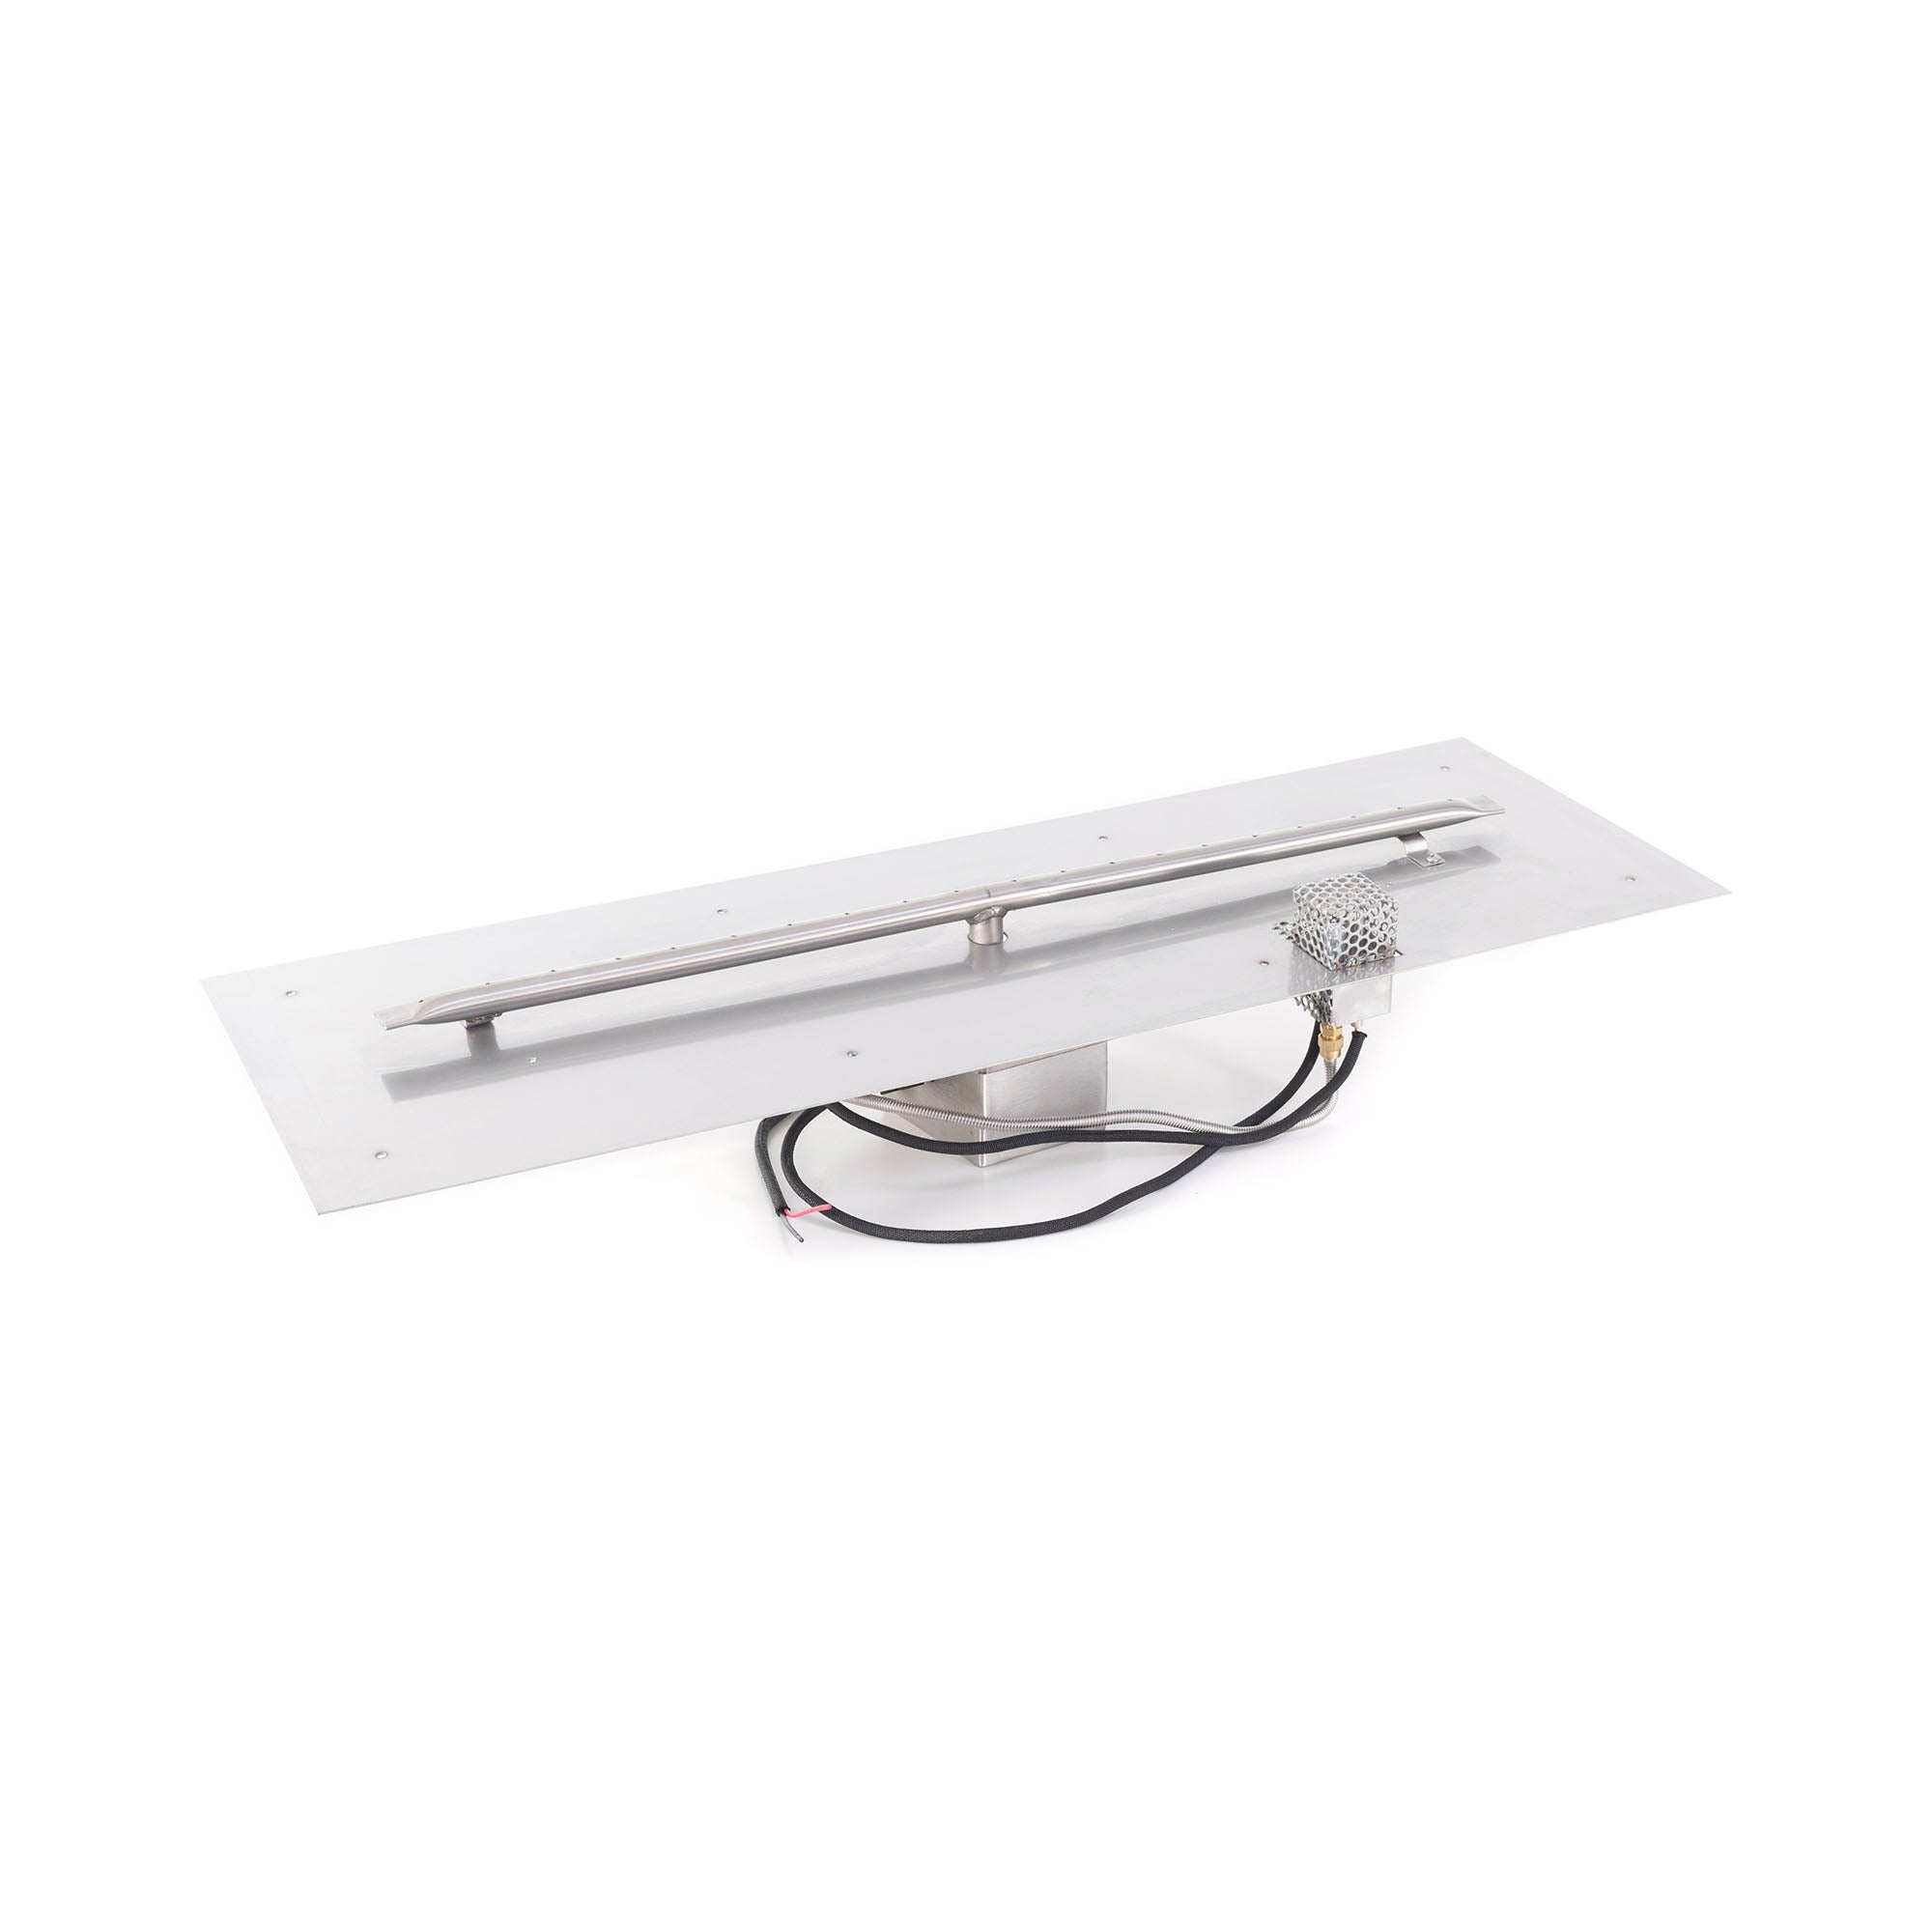 The Outdoor Plus - 48 Inch Rectangular Stainless Steel Flat Pan and 42 Inch Linear Burner - OPT-REFS848